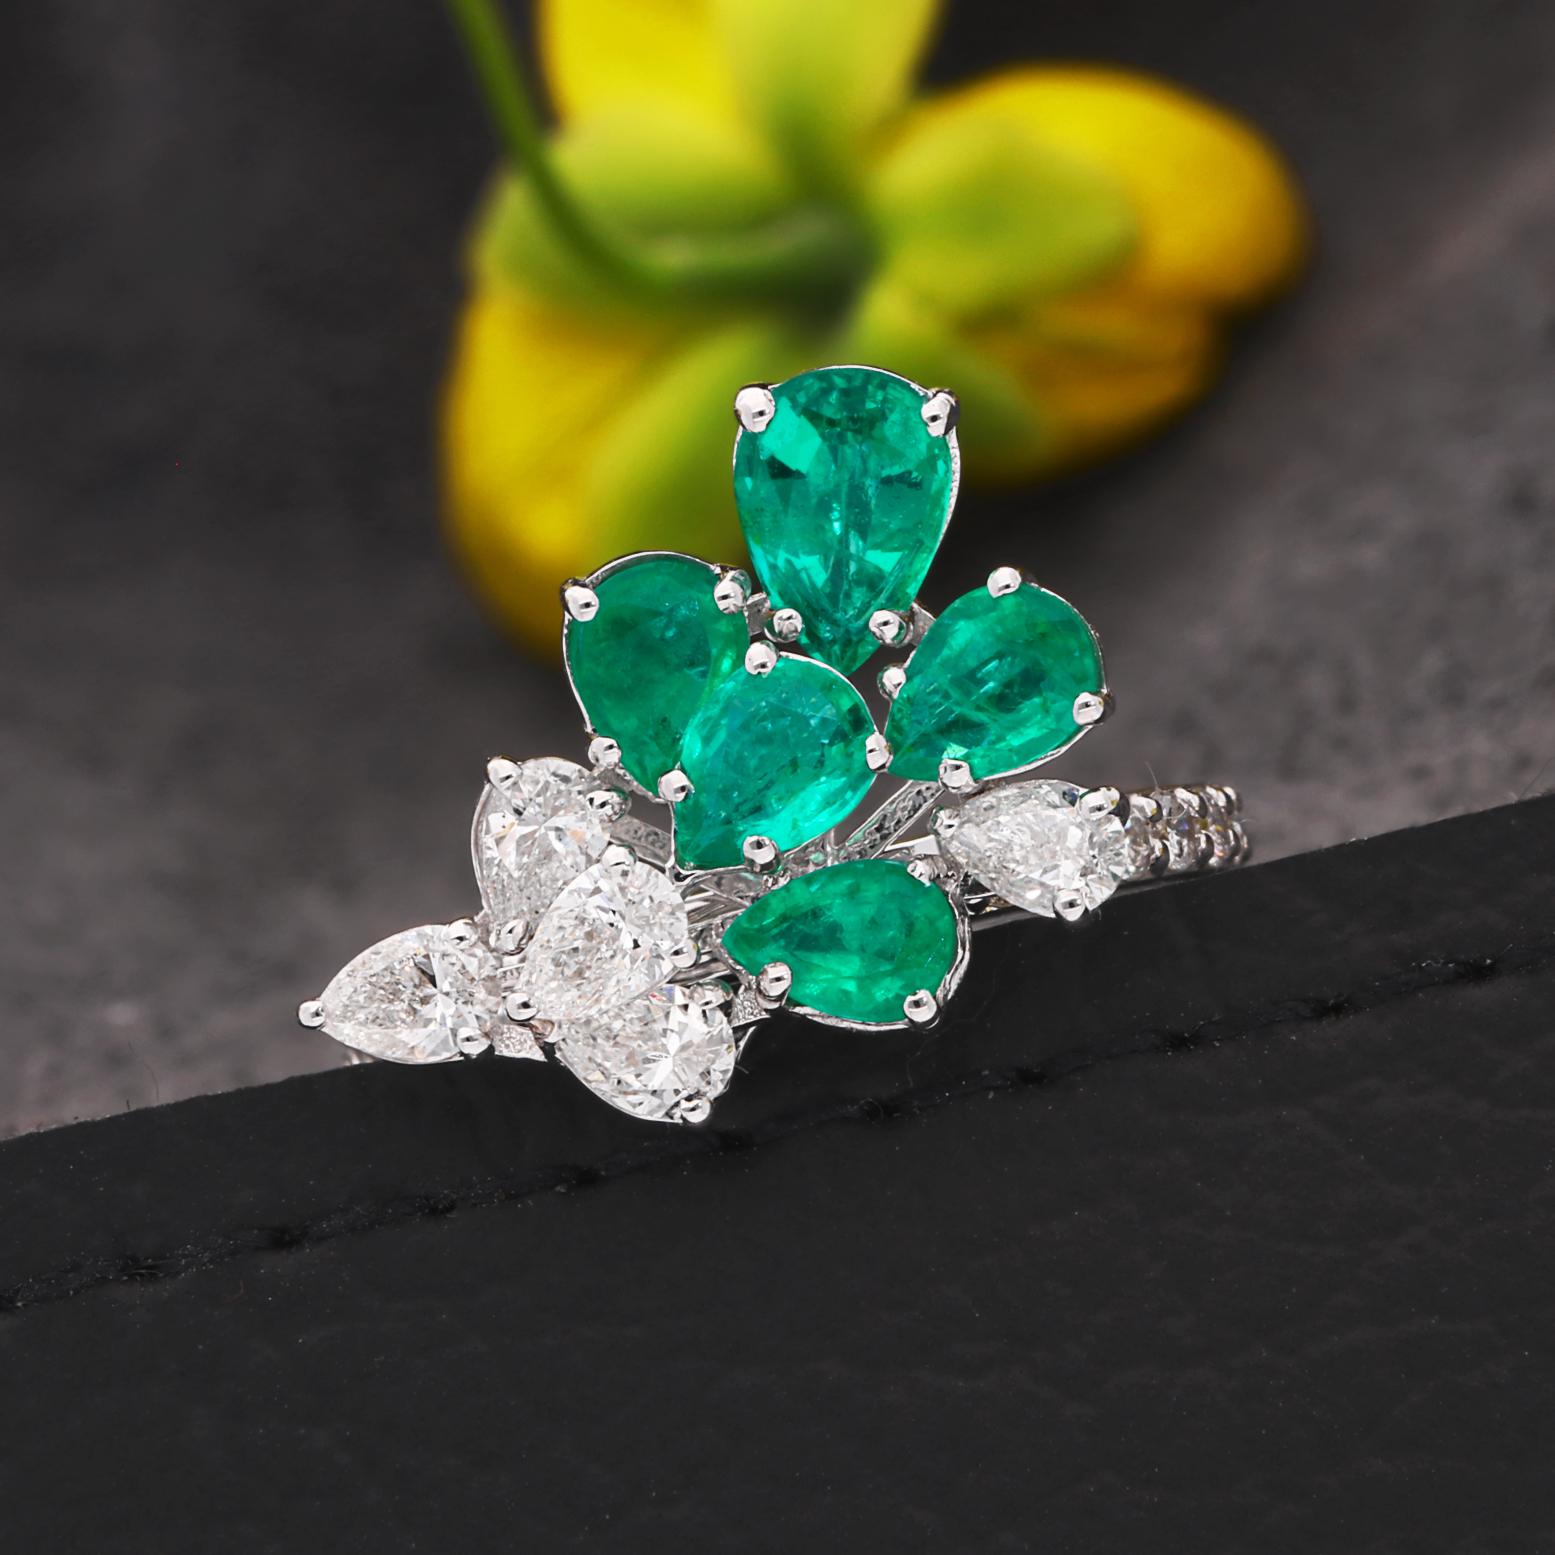 For Sale:  Pear Natural Emerald Gemstone Ring Pear Diamond Solid 18k White Gold Jewelry 3